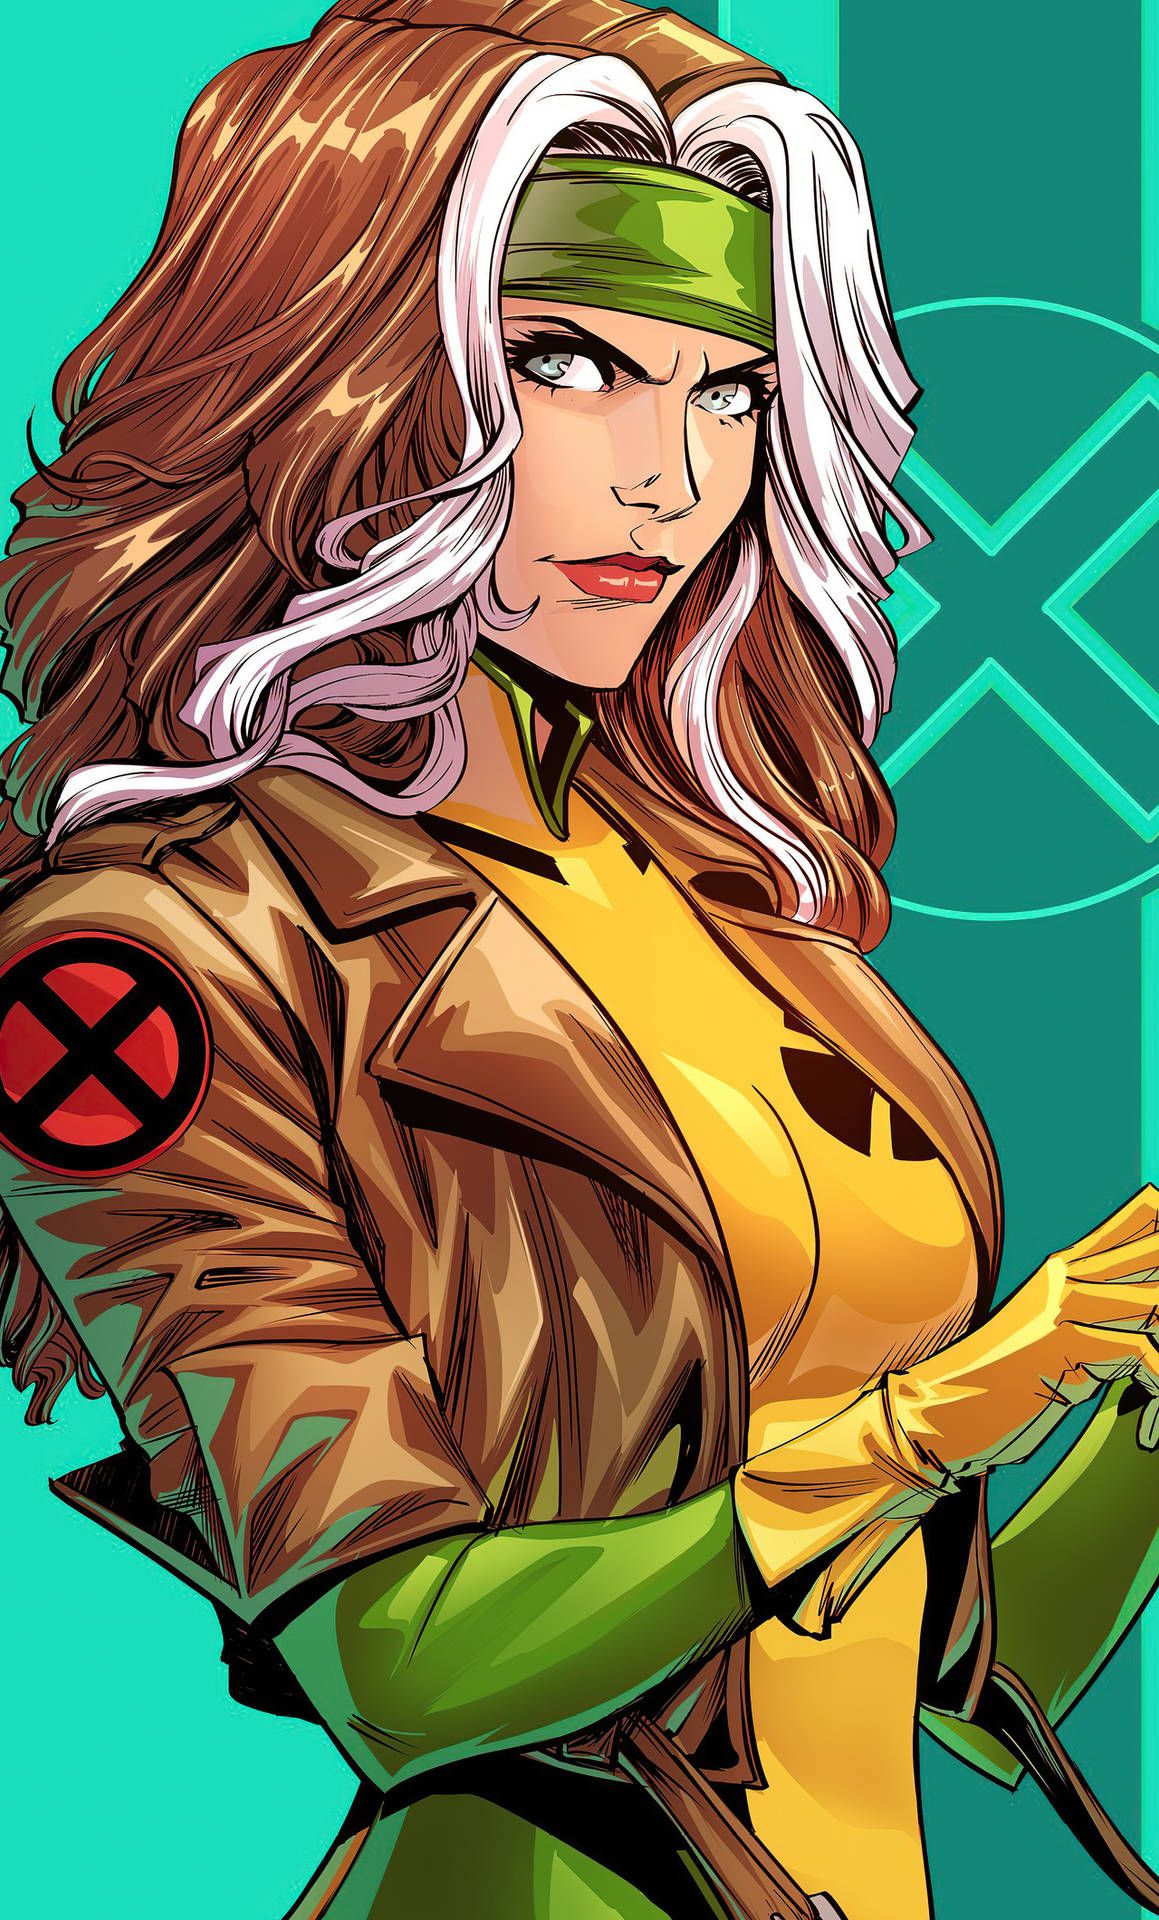 A close-up of a woman with white and red hair, wearing a yellow top, brown jacket, and gloves. She has a green headband and is looking to the side. - Rogue